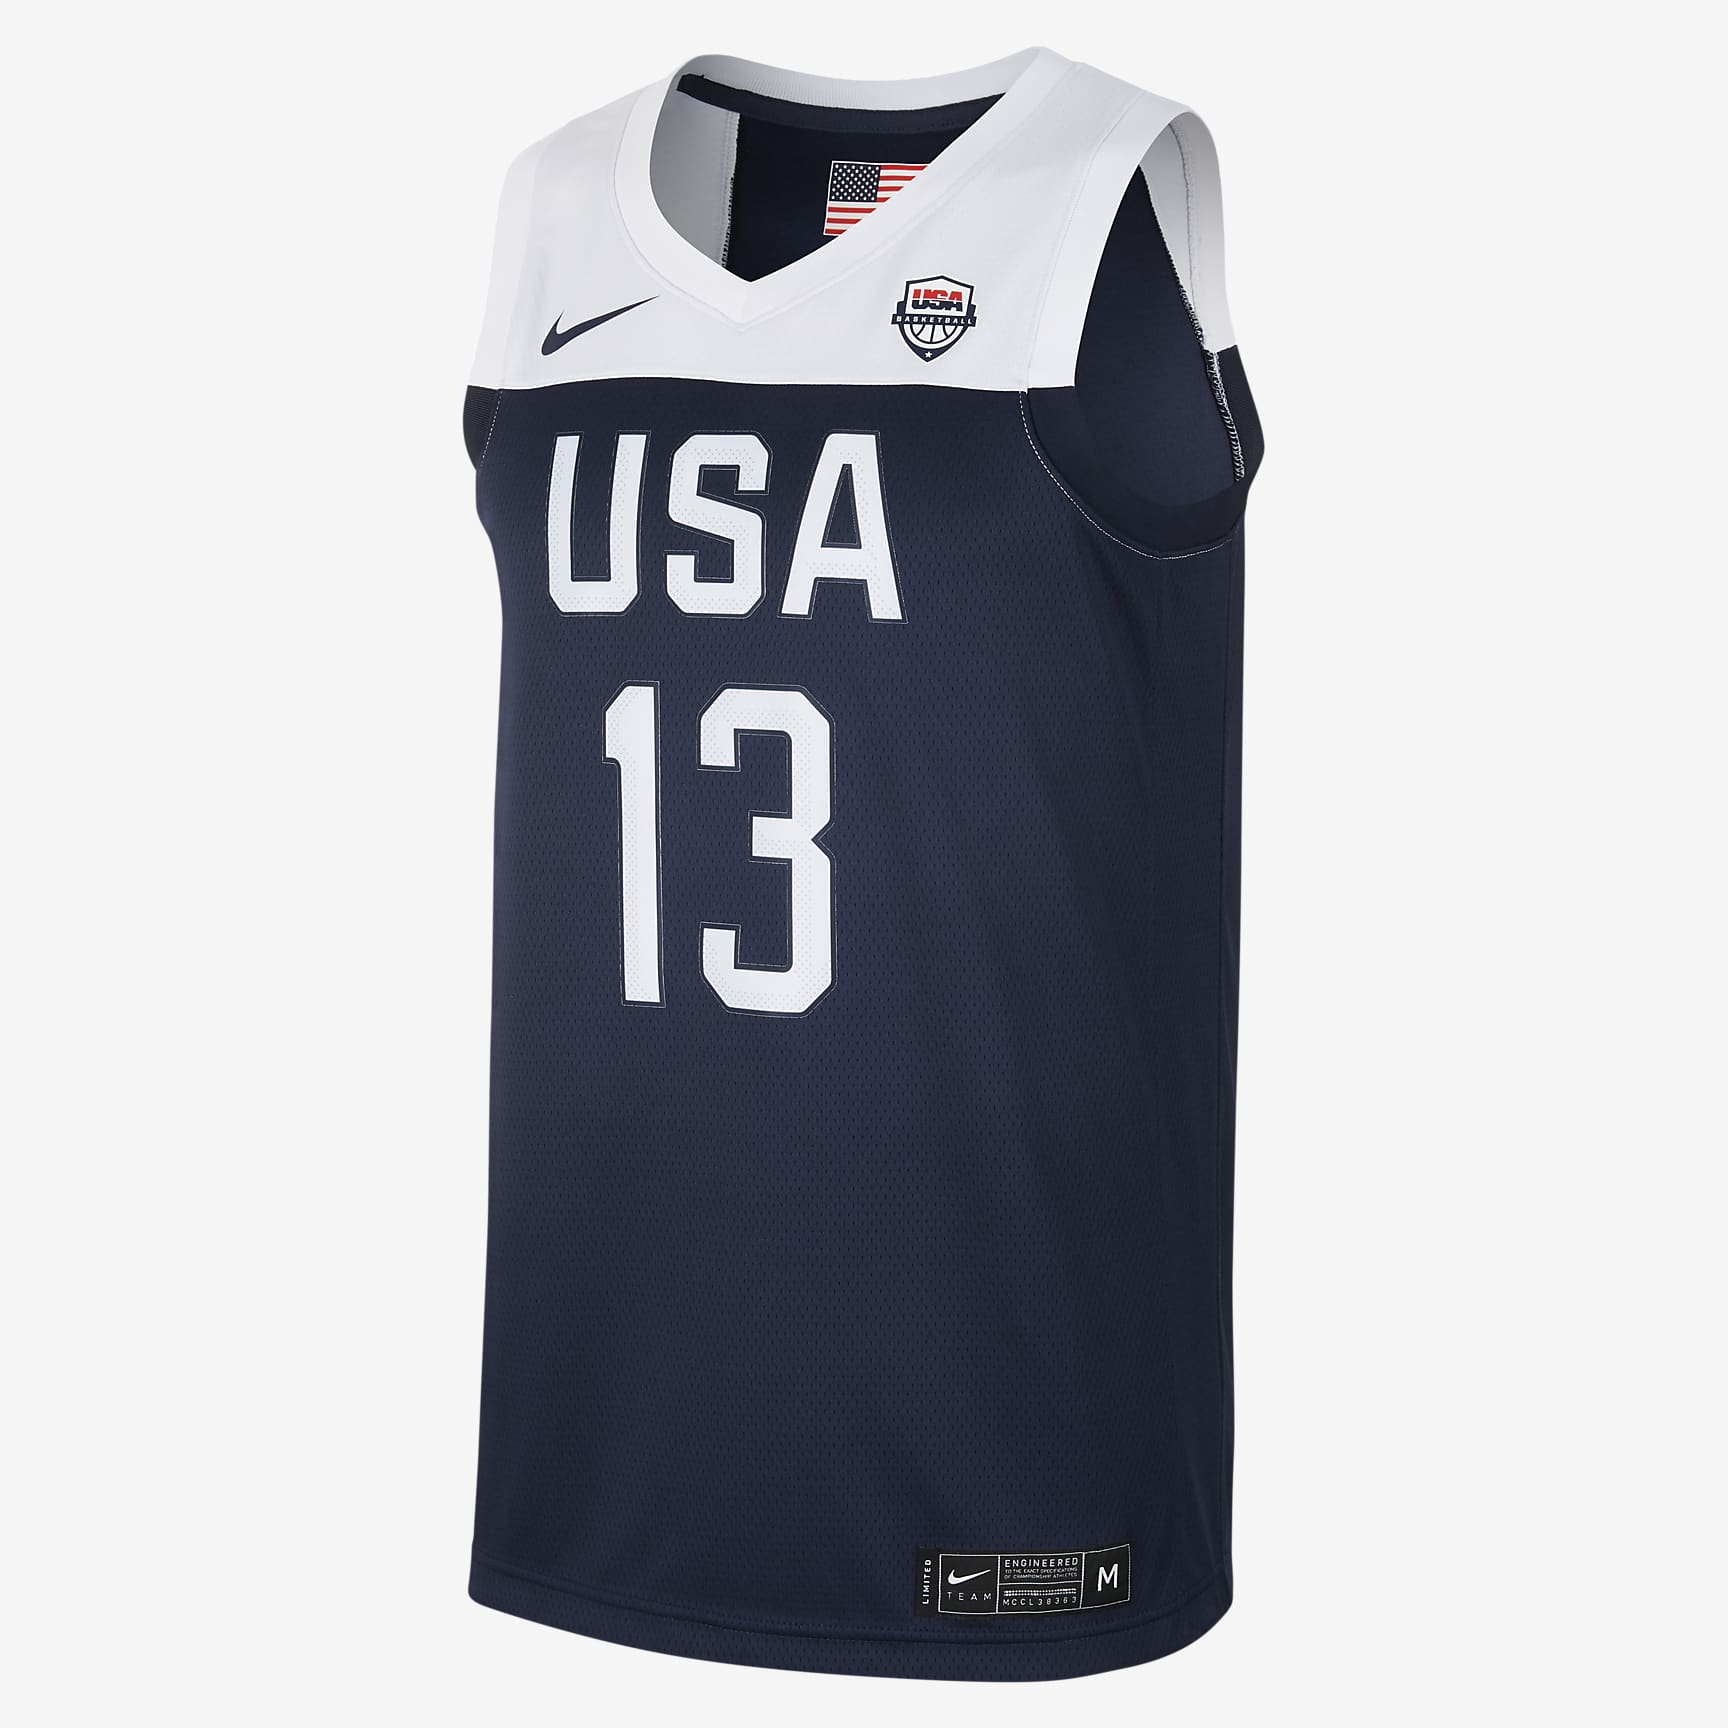 Maillot de basketball USA Nike (Road) pour Homme. Nike CH